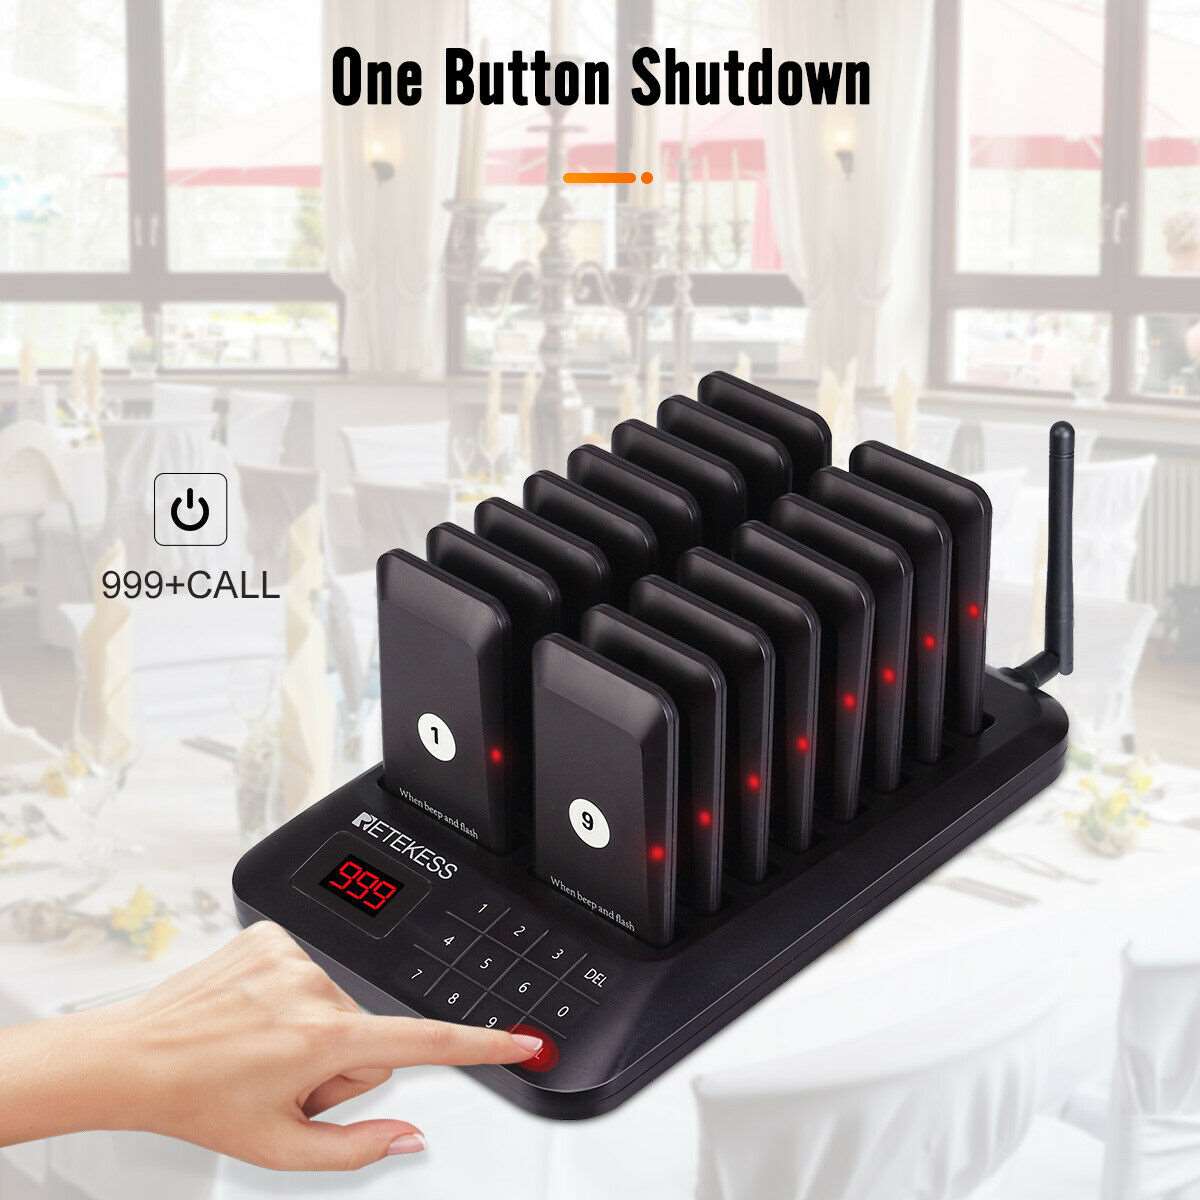 Retekess TD157 Pager Restaurant, Waiter Paging System, 20H Restaurant Buzzers Touch Screen 1 Calling Keypad with 16 Pagers Black